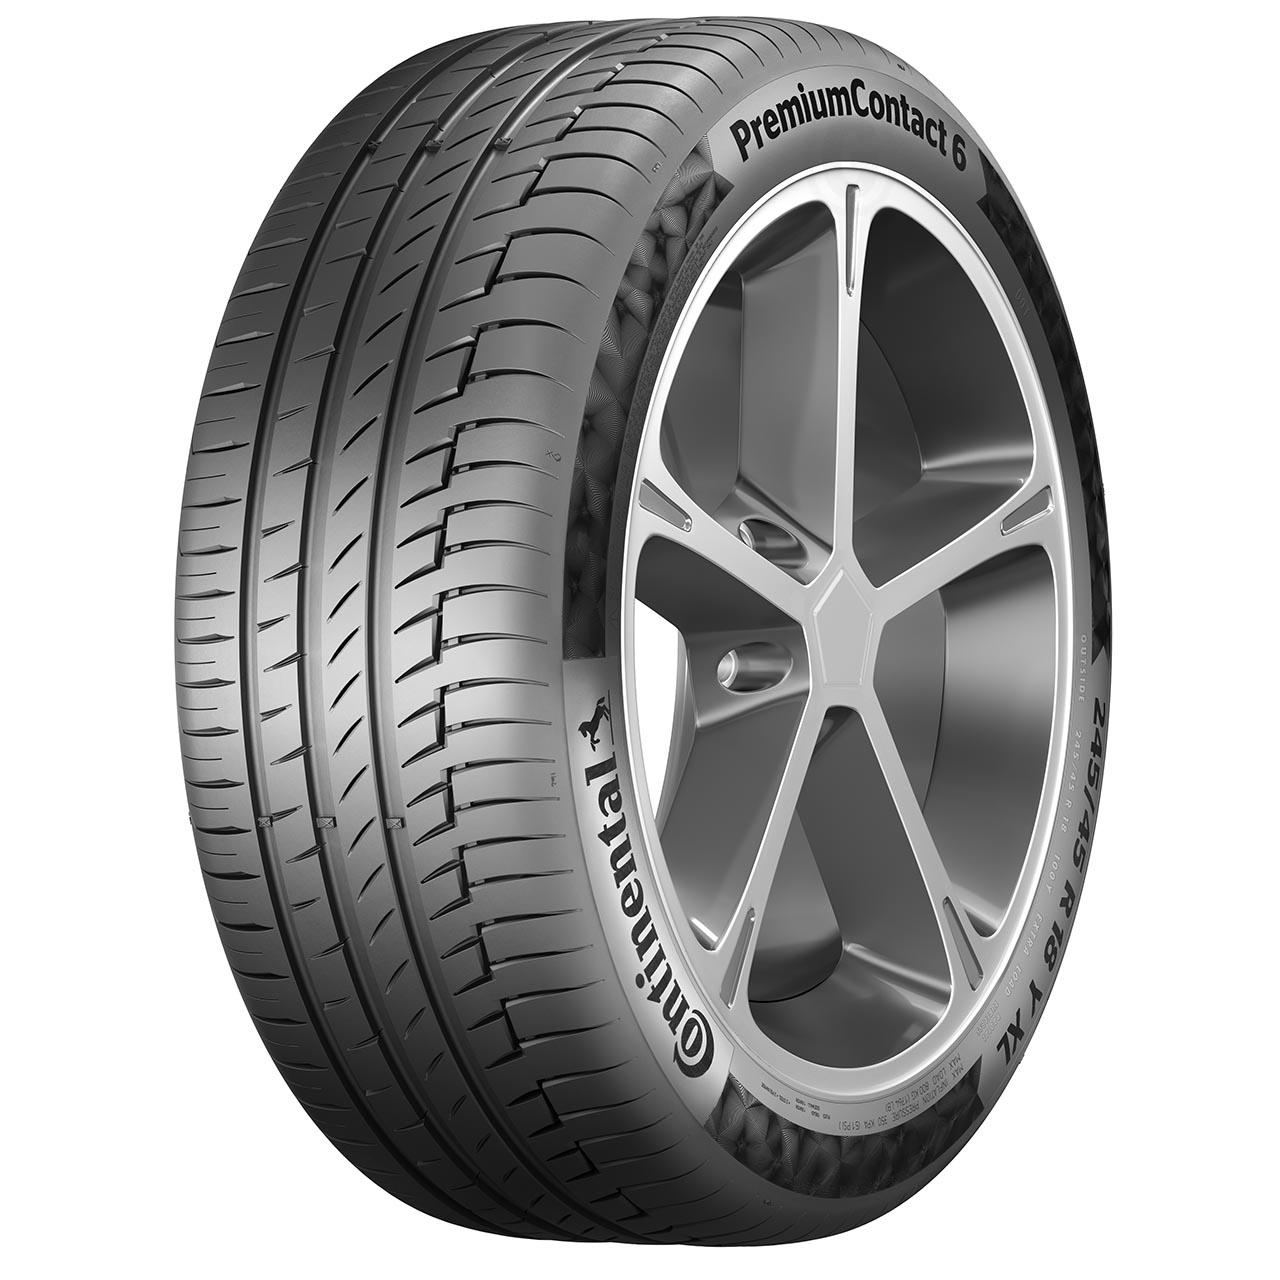 Continental PREMIUMCONTACT 6 325/40R22 114Y MO S SIL